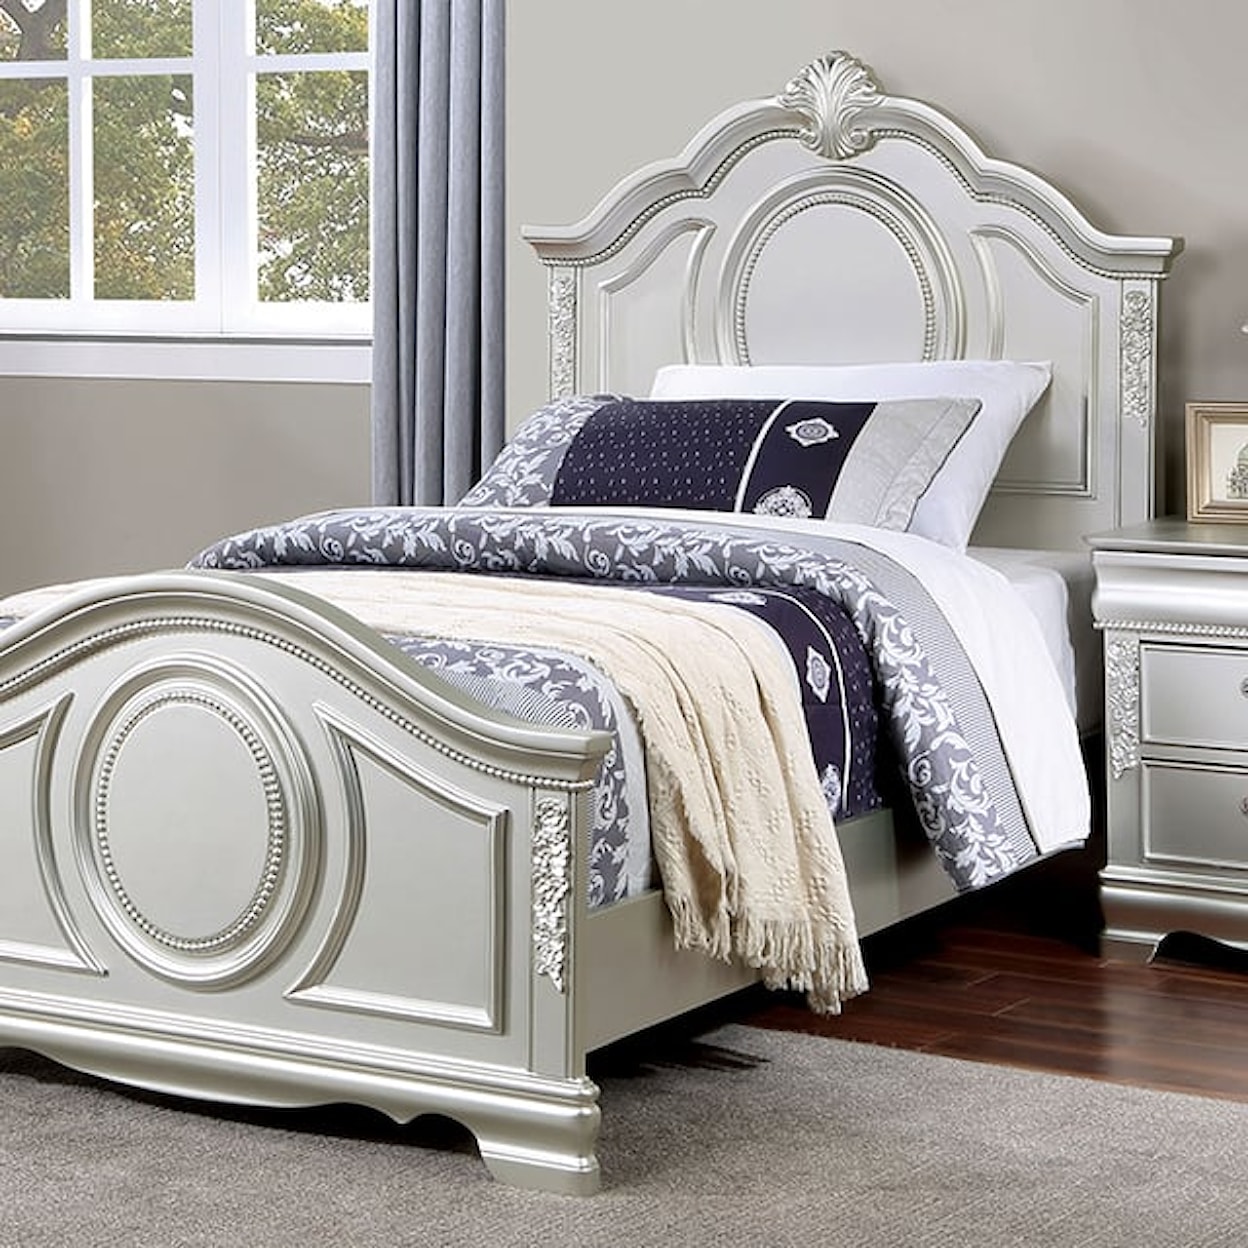 Furniture of America - FOA Alecia Full Bed with Wood Carved Details